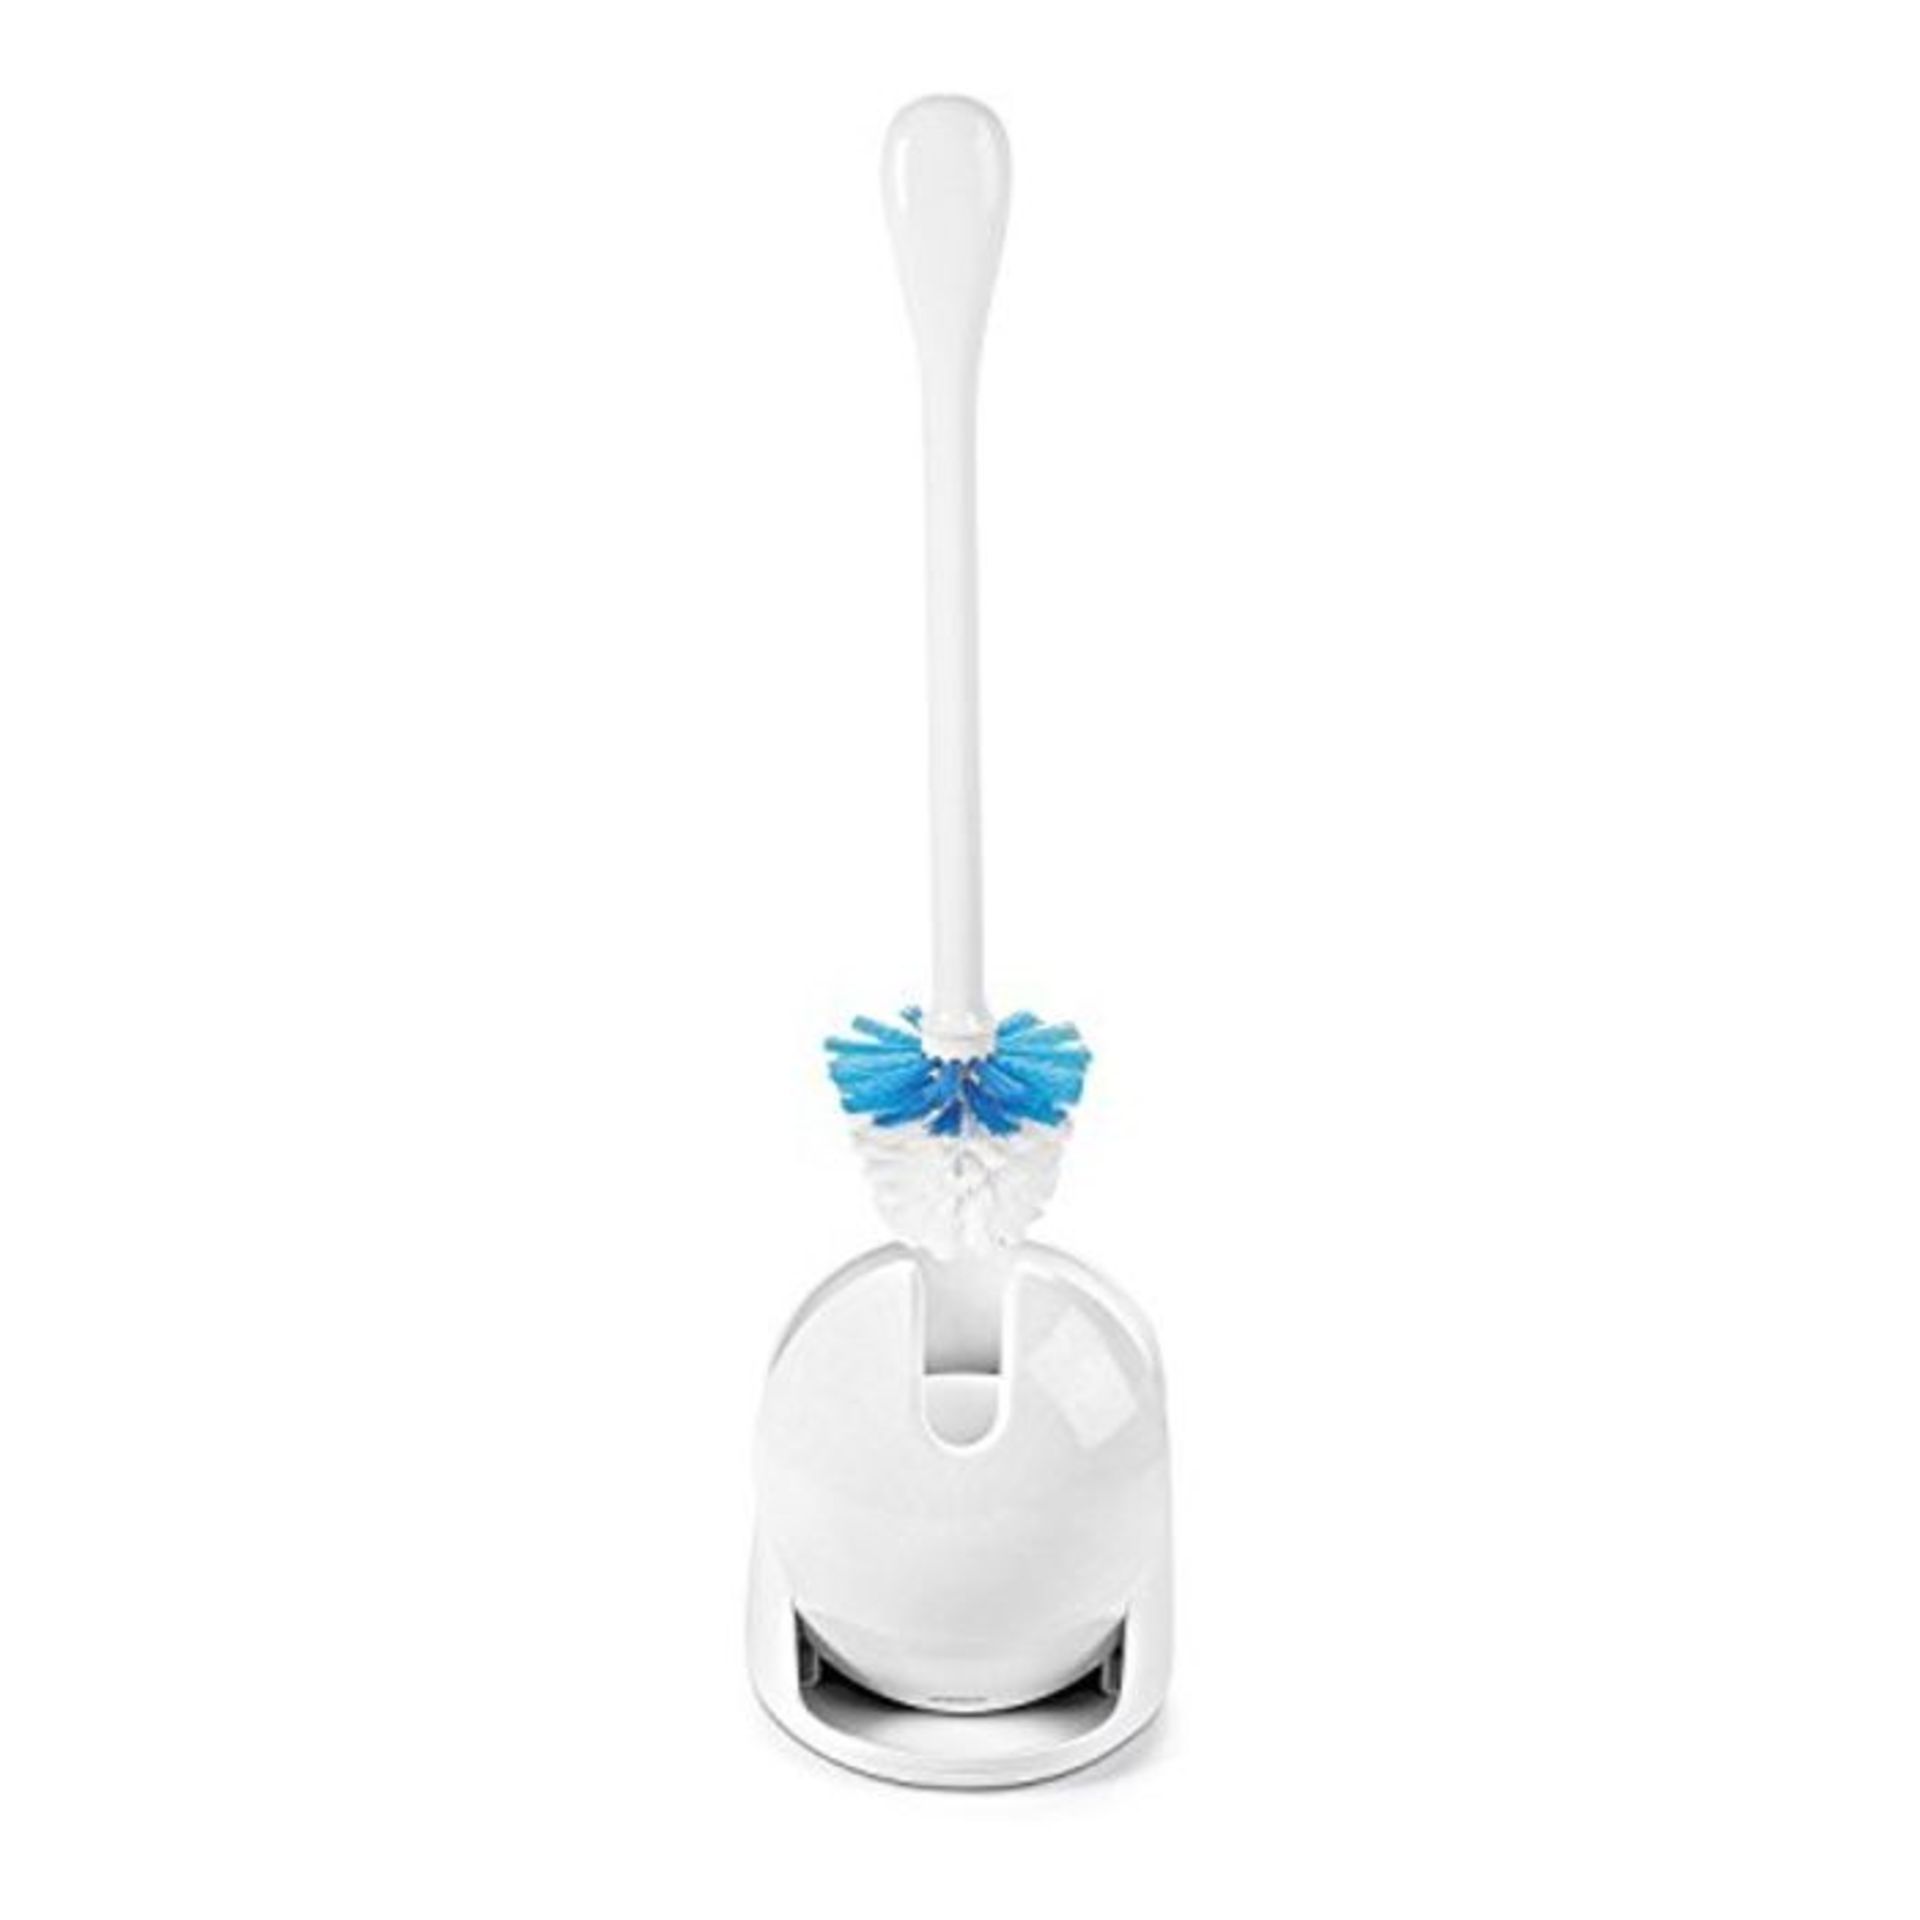 OXO 1281600 Good Grips Compact Toilet Brush & Canister-White, Inoxidable, 6" x 4-3/4"